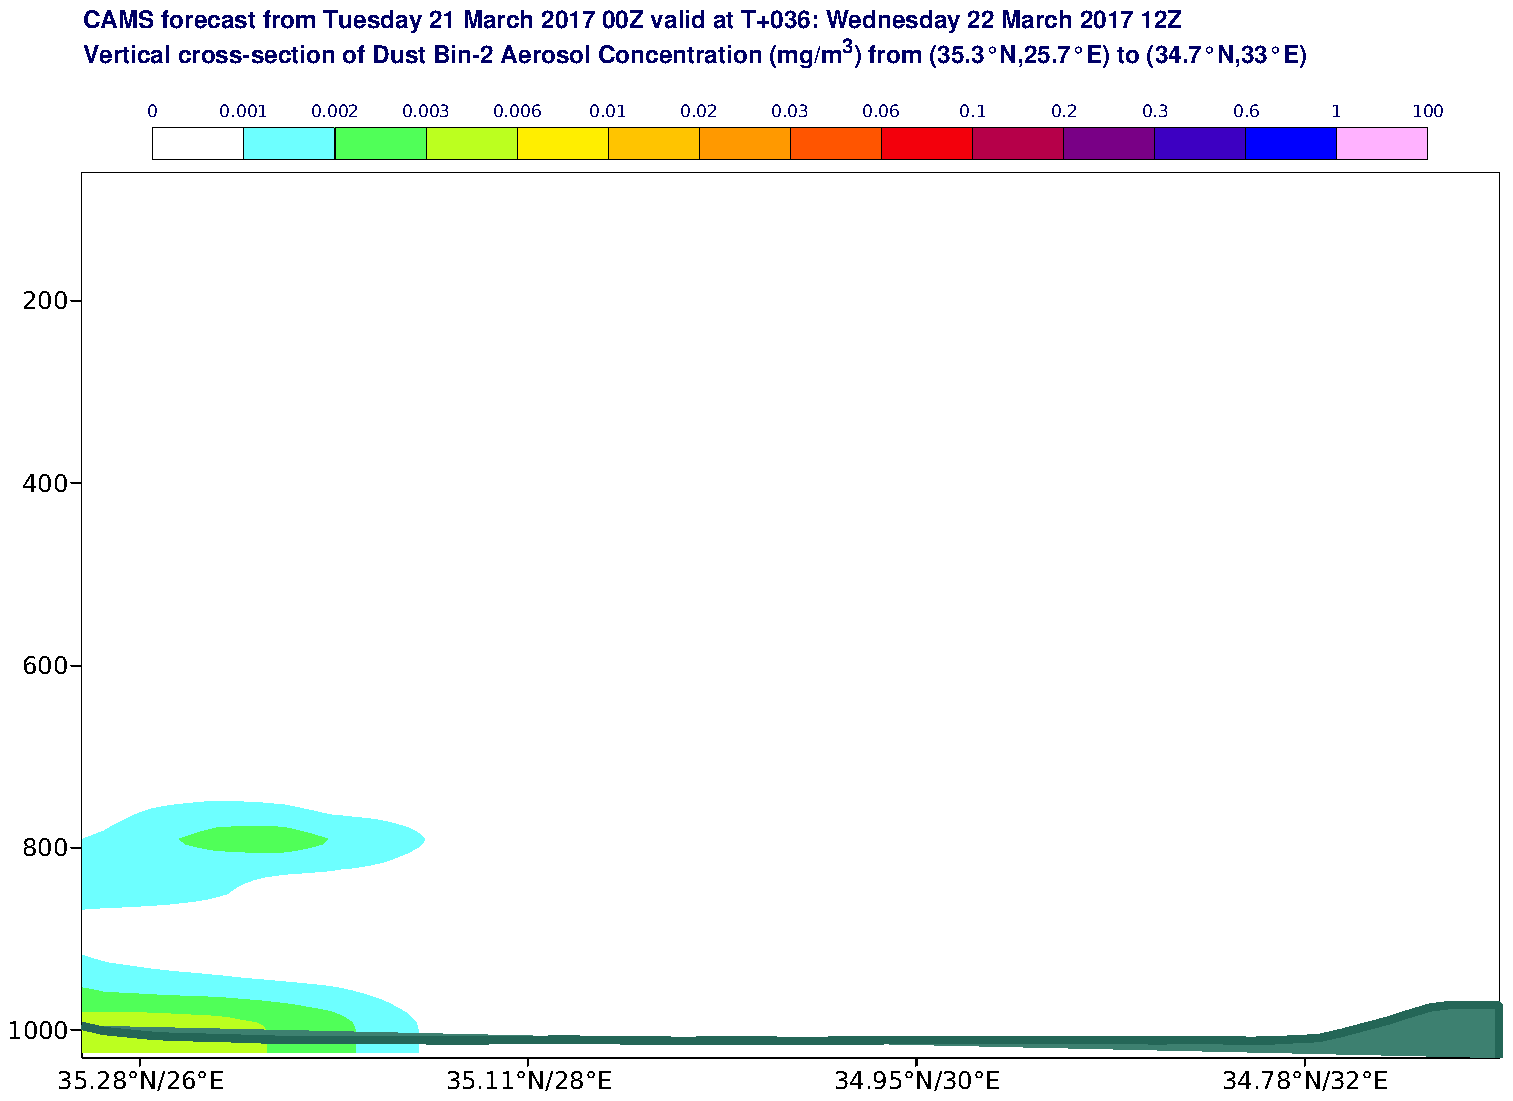 Vertical cross-section of Dust Bin-2 Aerosol Concentration (mg/m3) valid at T36 - 2017-03-22 12:00